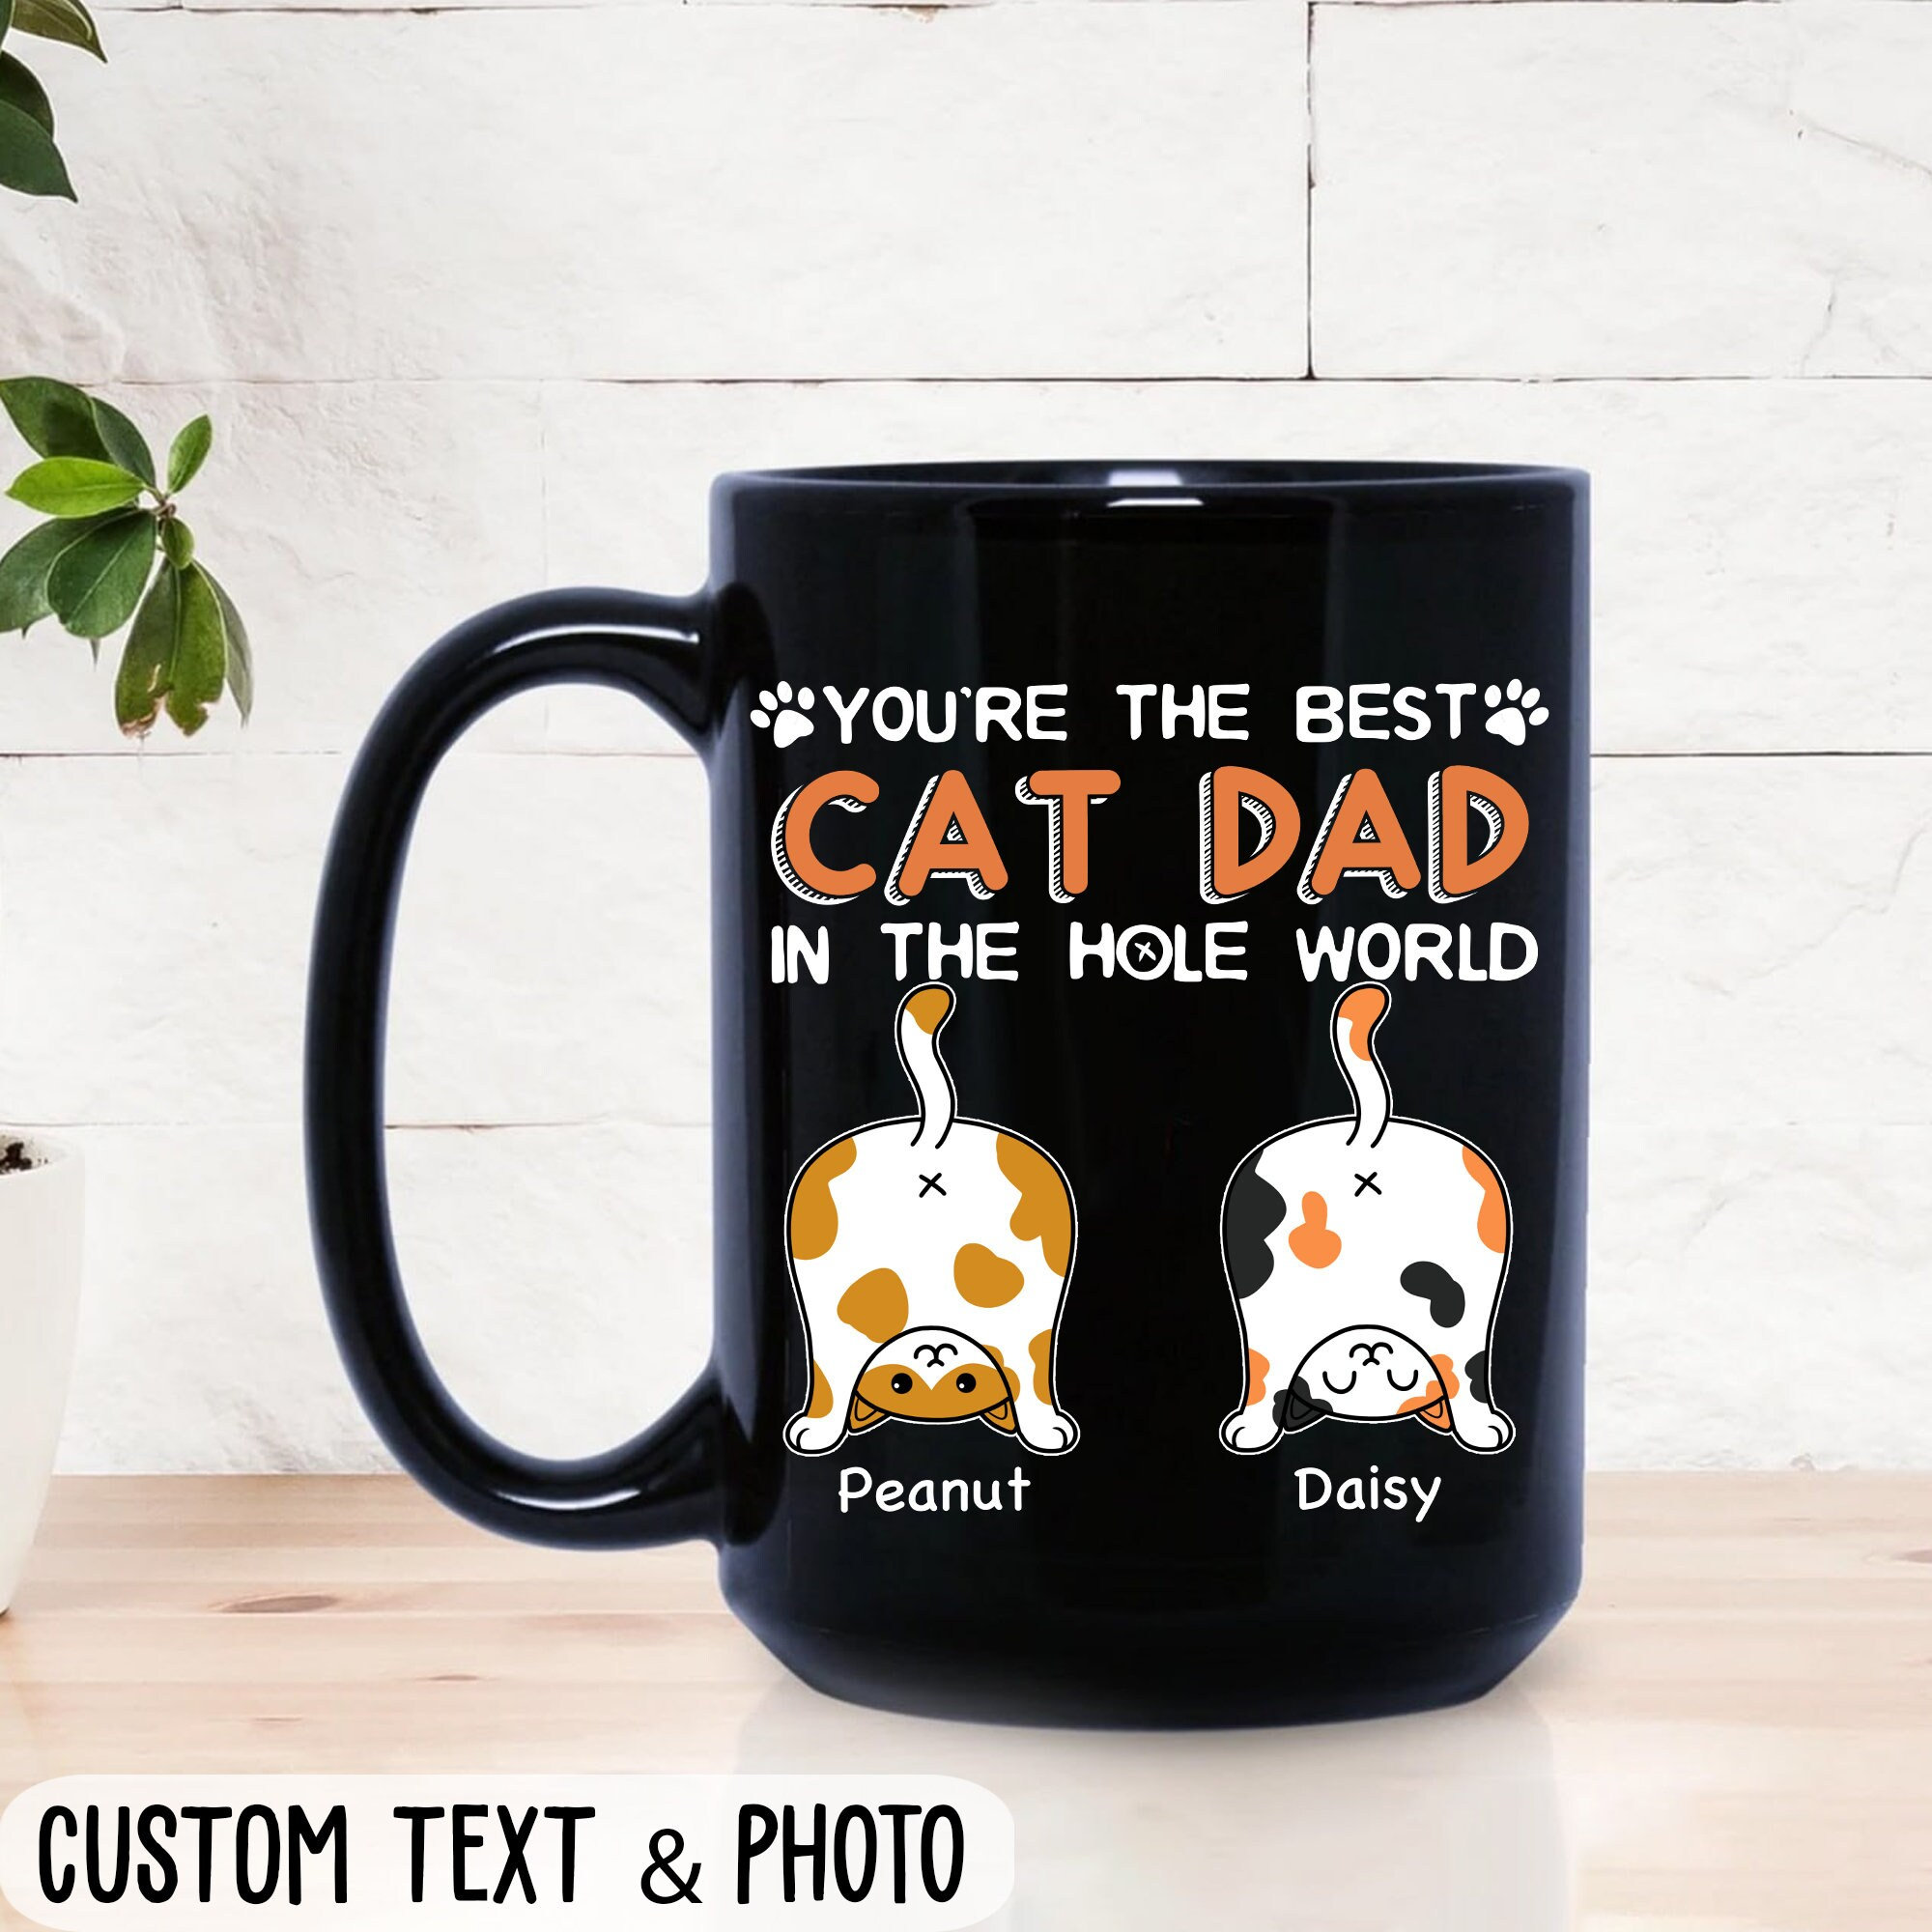 Cat Dad Love You A W-hole Lot Personalized Mug - GiftyGifts™️